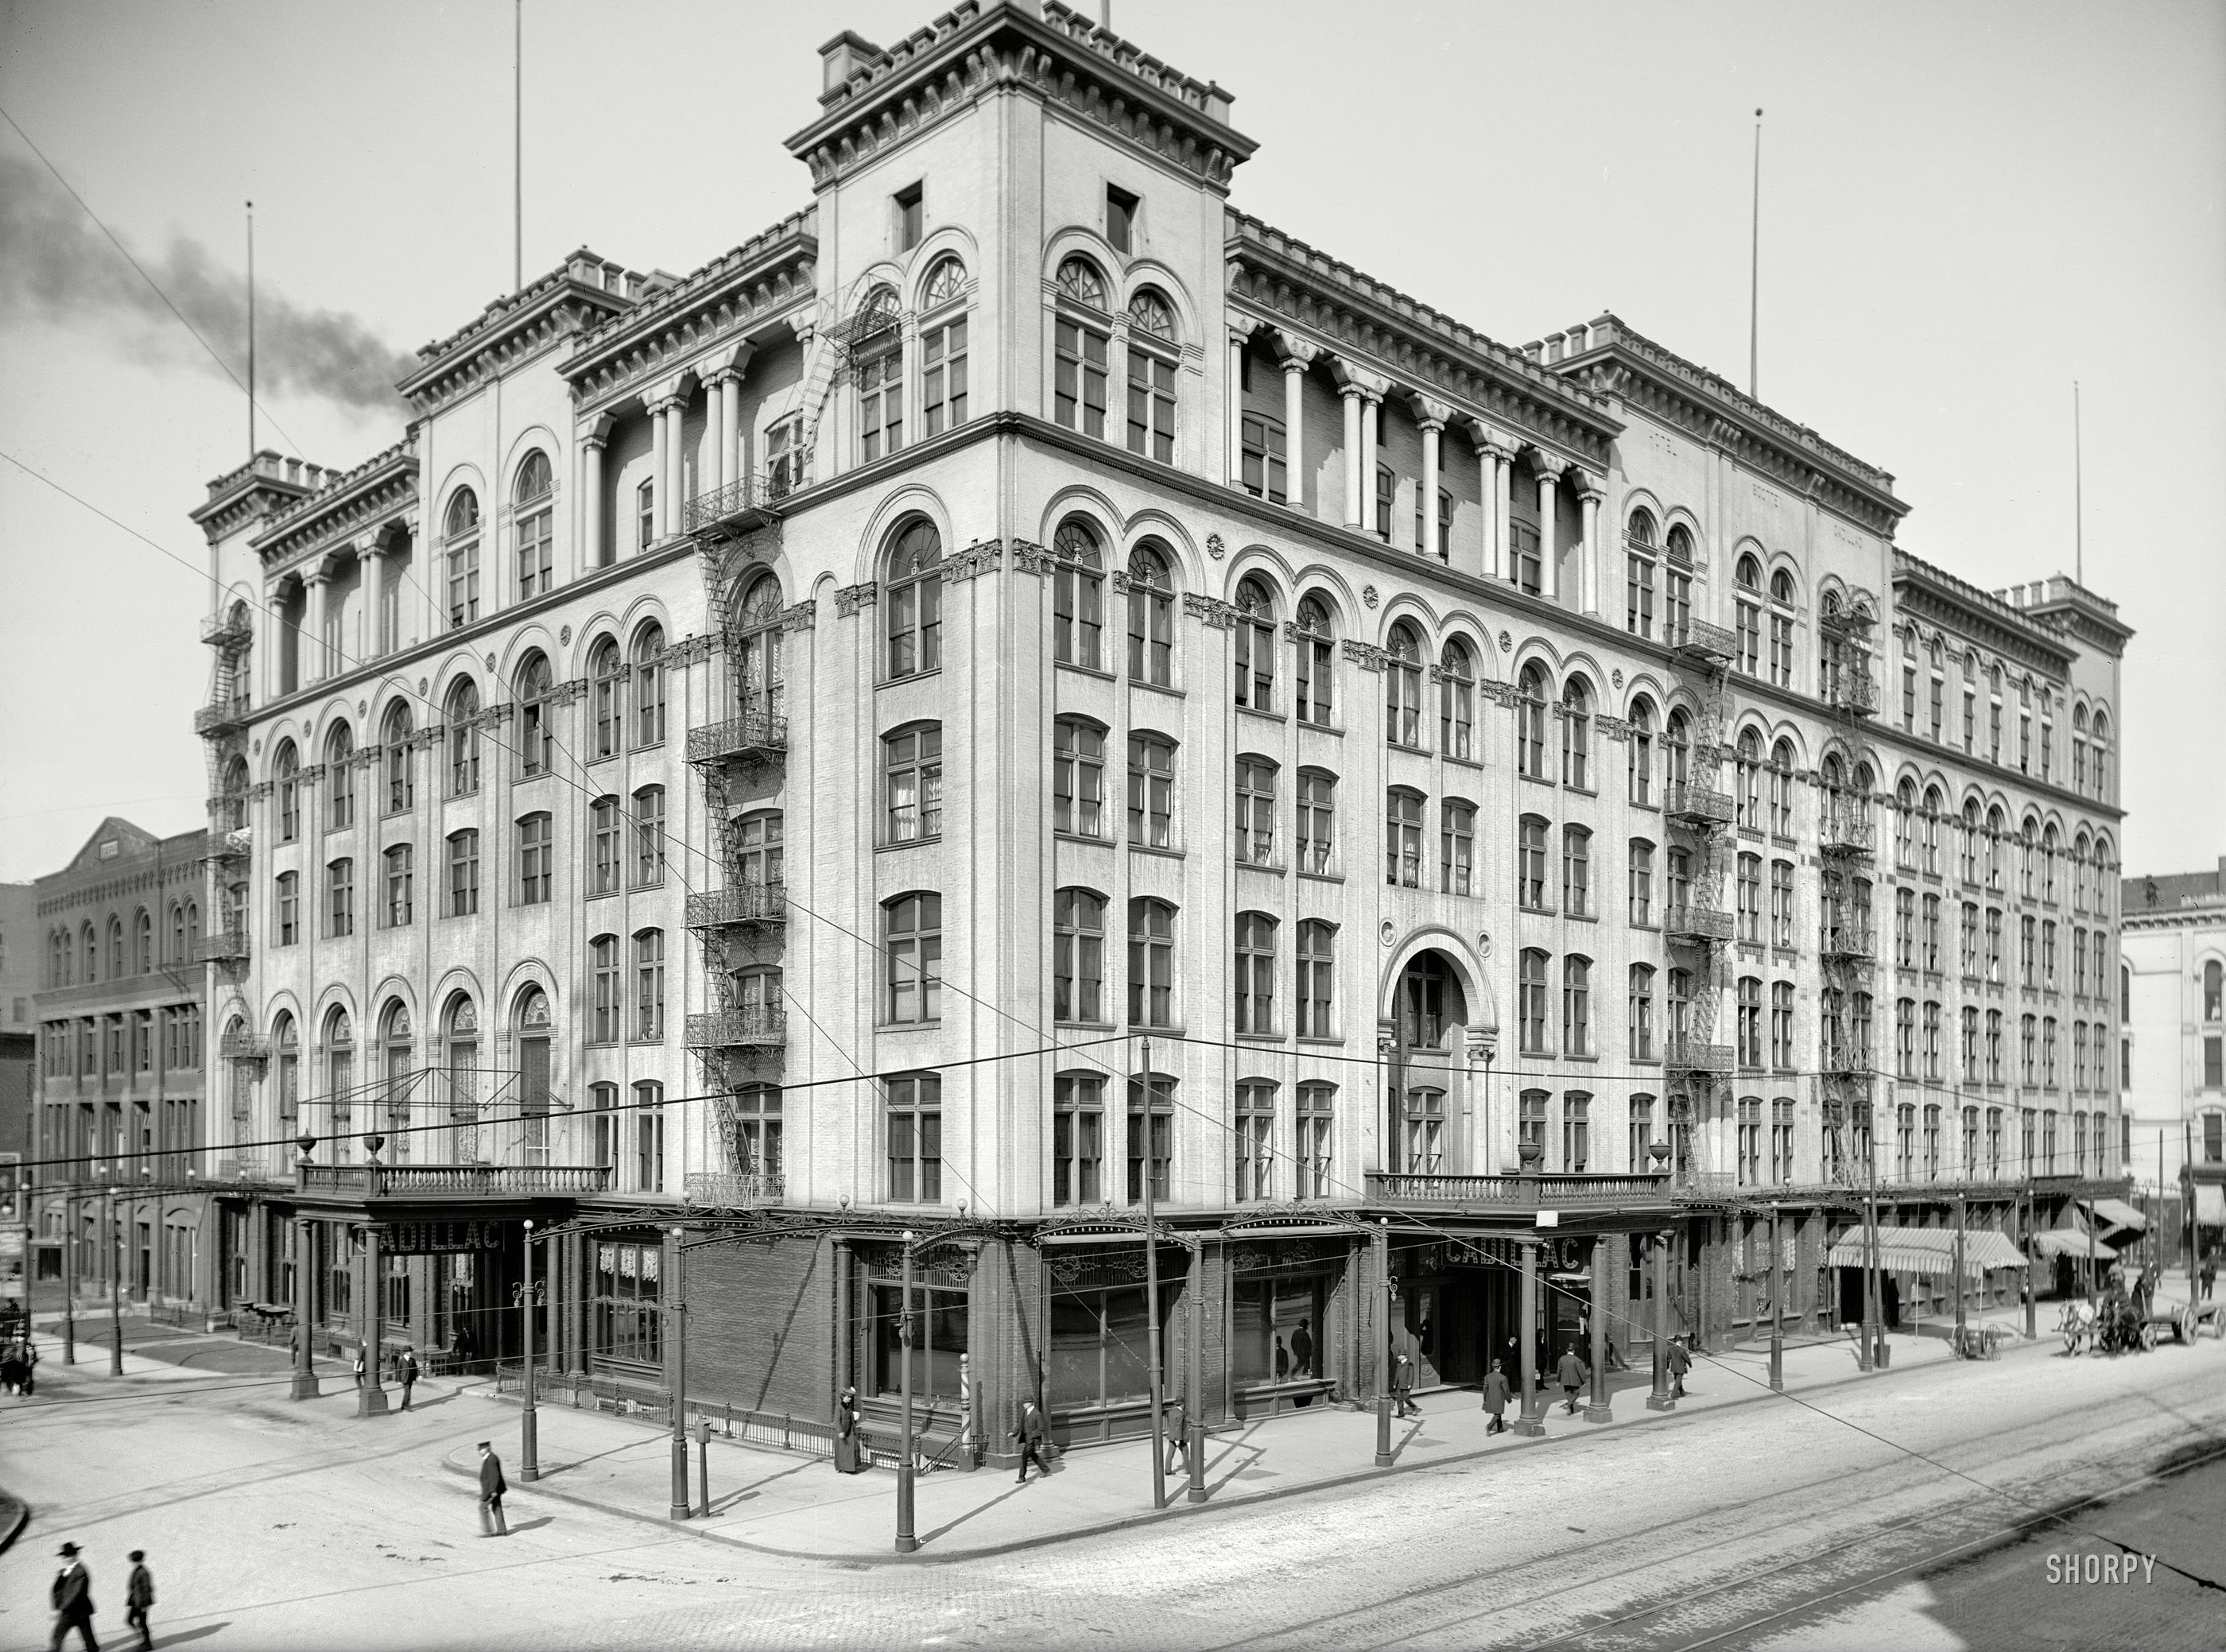 Cadillac Building, Detroit, Michigan by Shorpy